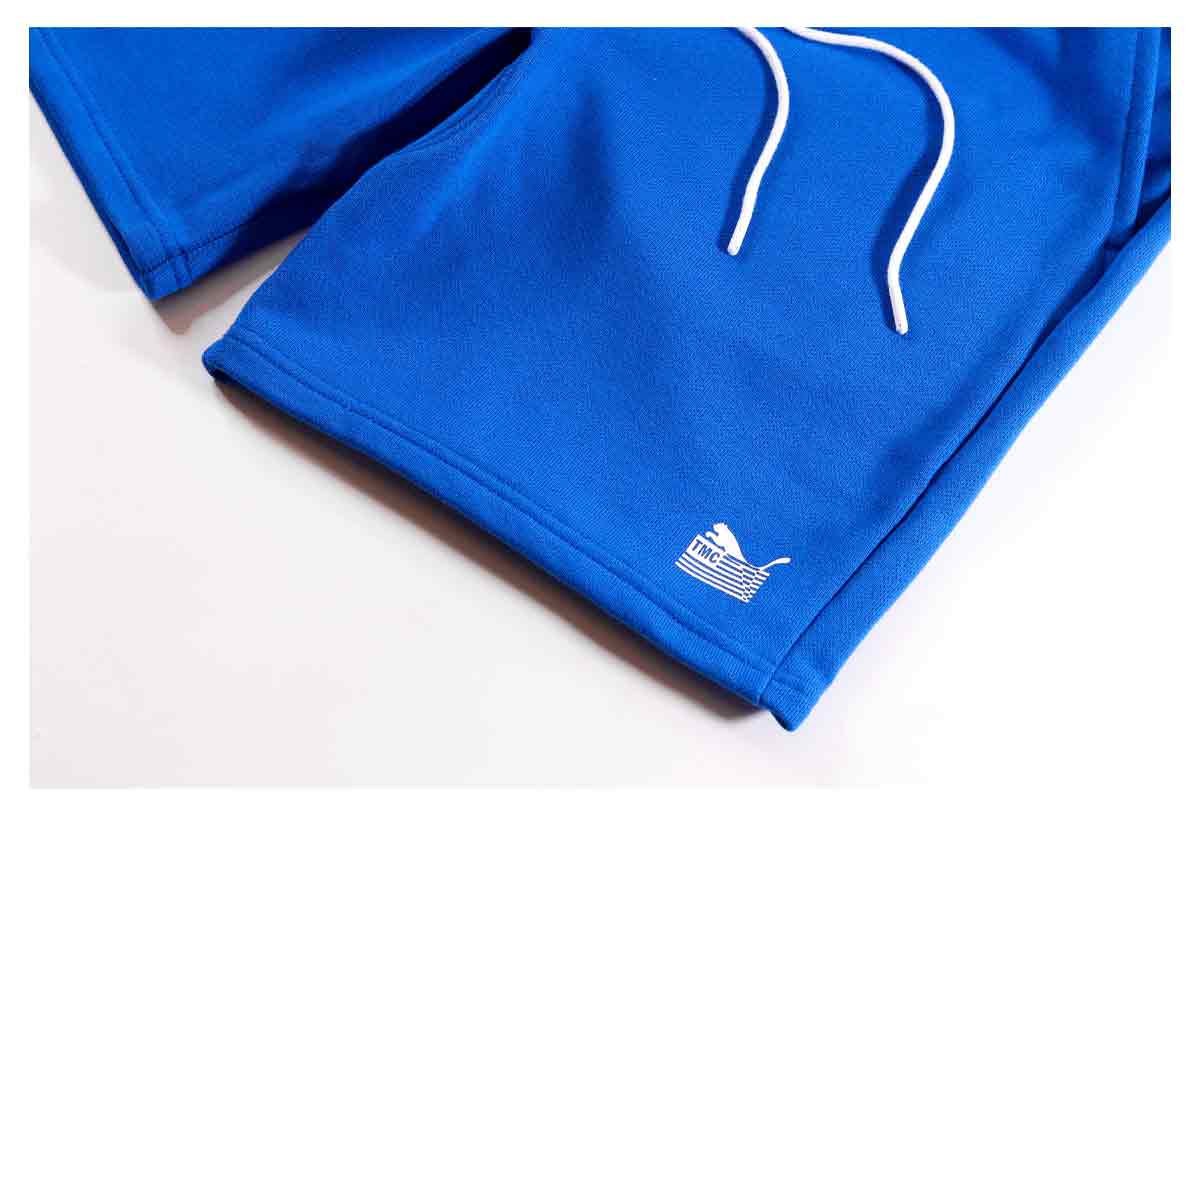 PUMA x TMC Everyday Hussle Collection Sweat Shorts - Royal Blue